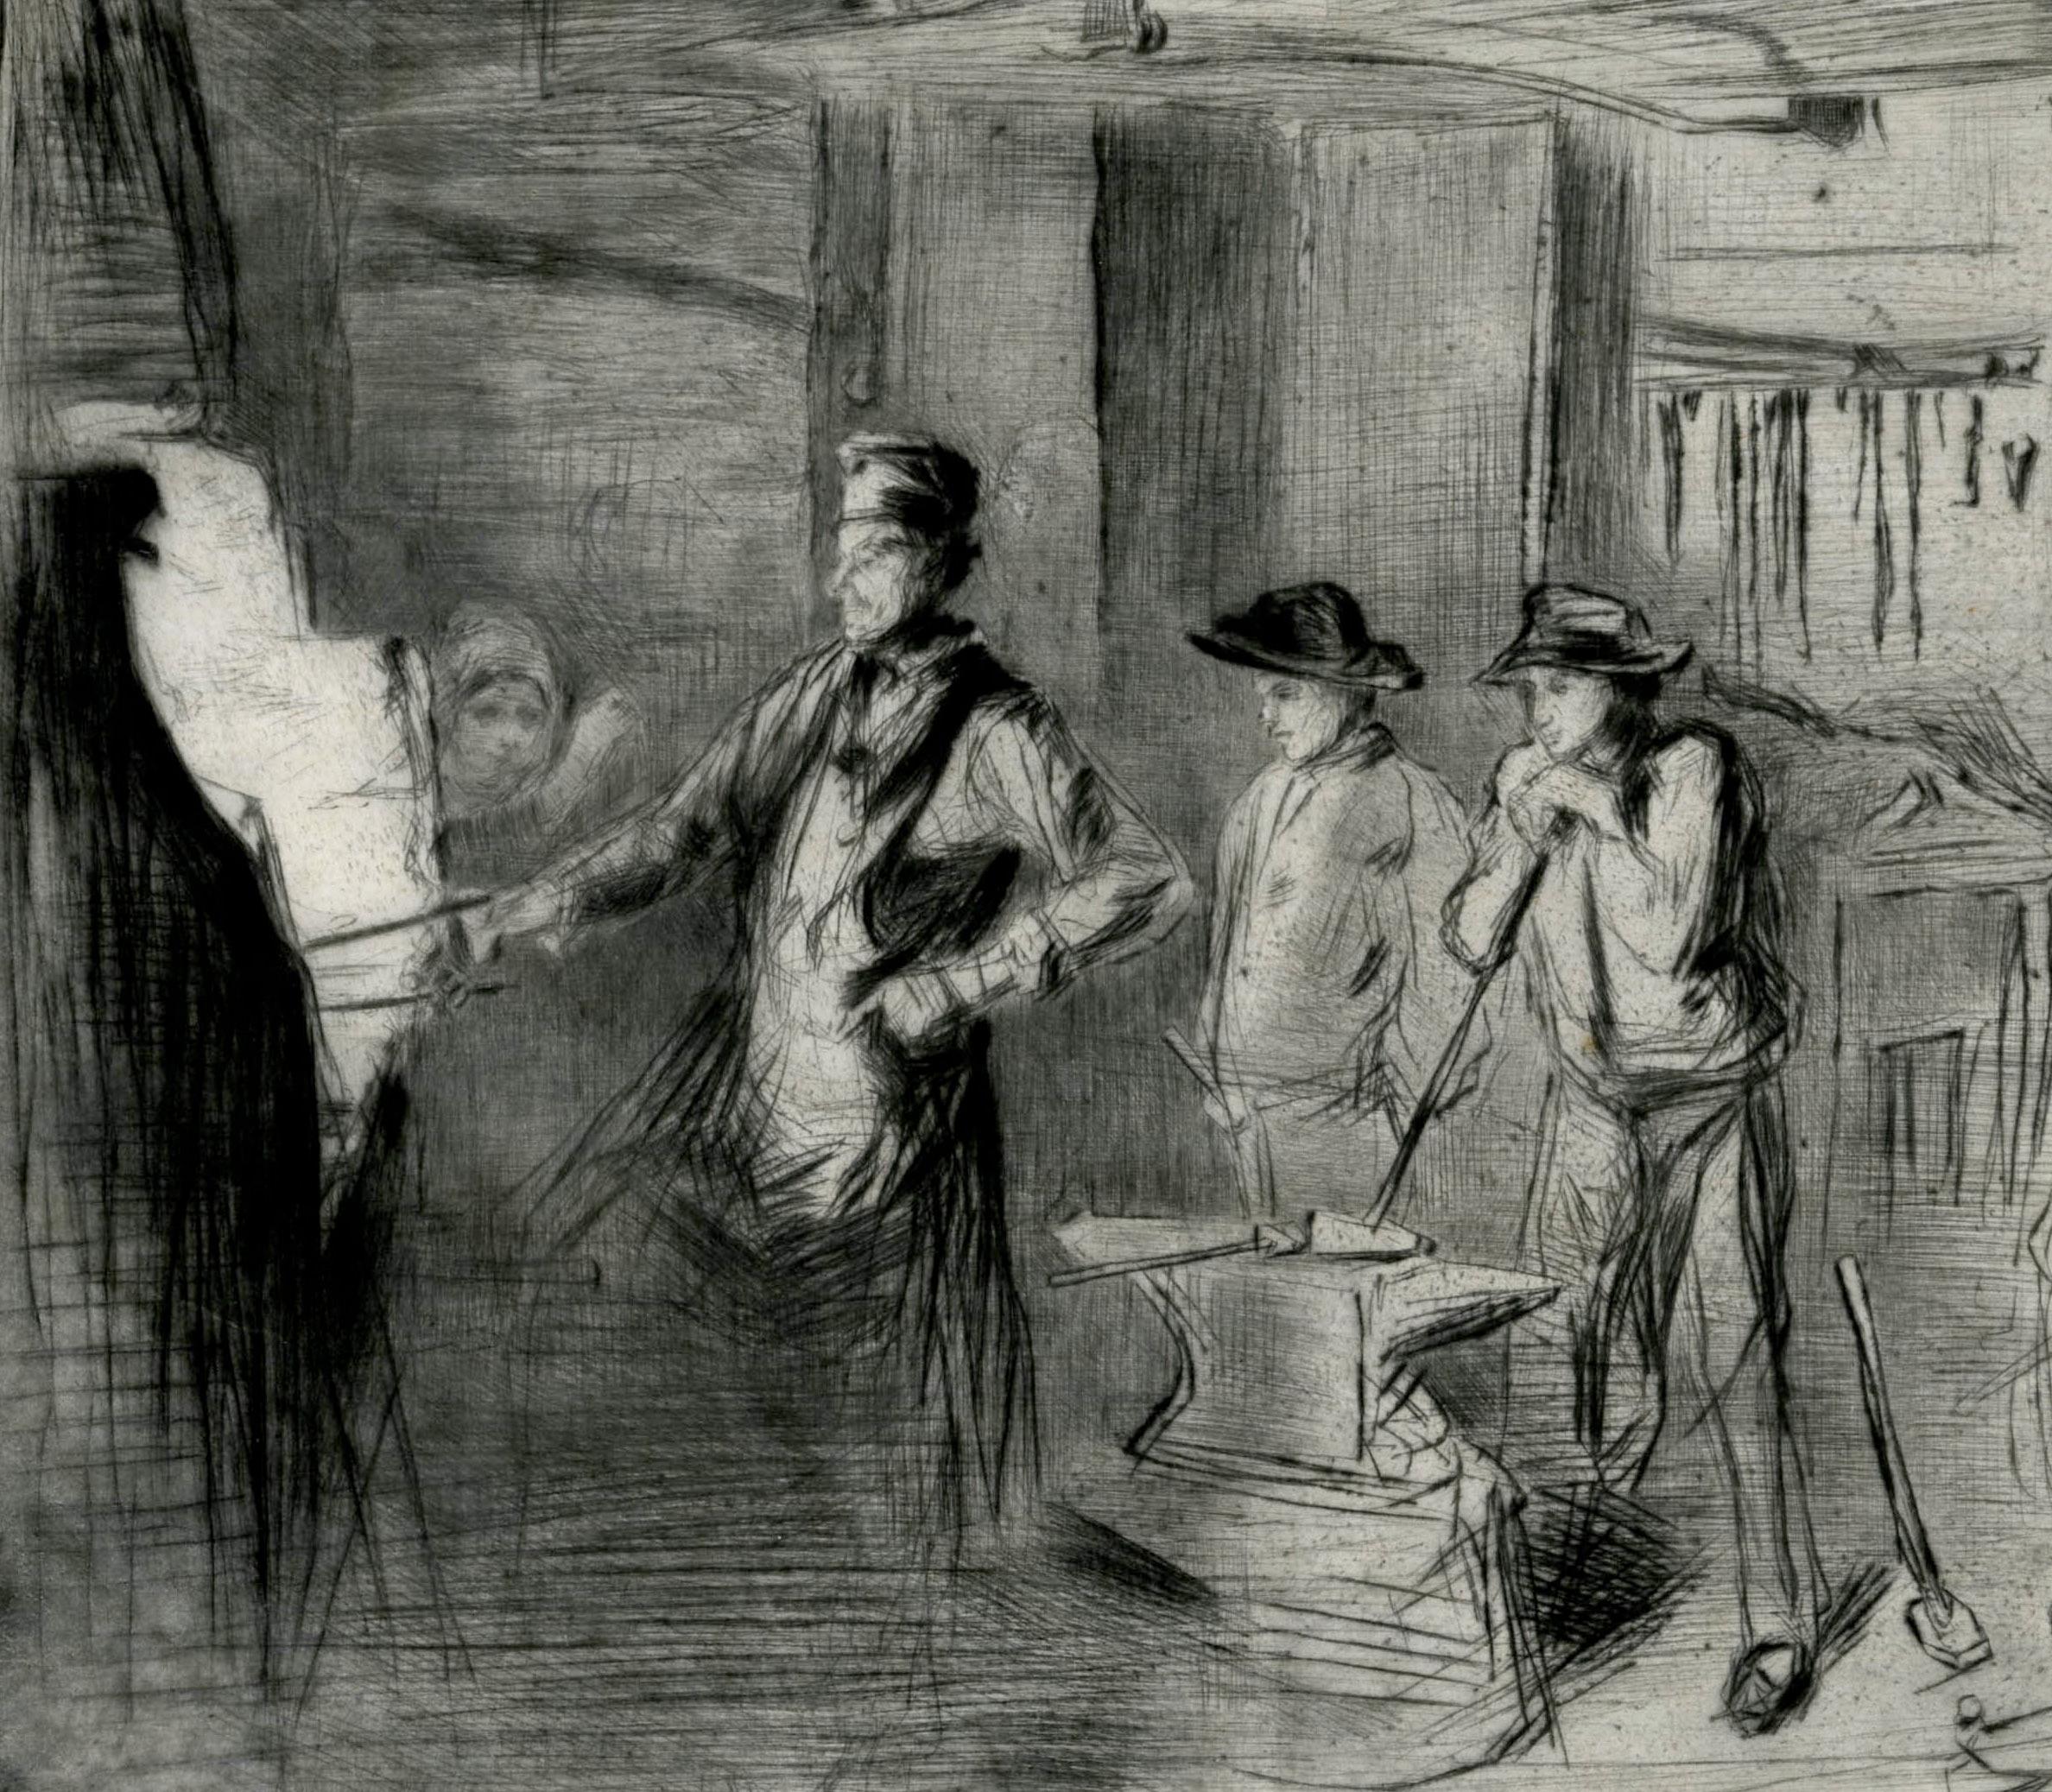 The Forge
Drypoint, 1861
Signed in the plate lower right (see photo)
Published as part of the Thames Set, 1871
Printed between 1894 and 1896 when the plate was canceled. This impression was probably printed for the then owners of the plate,